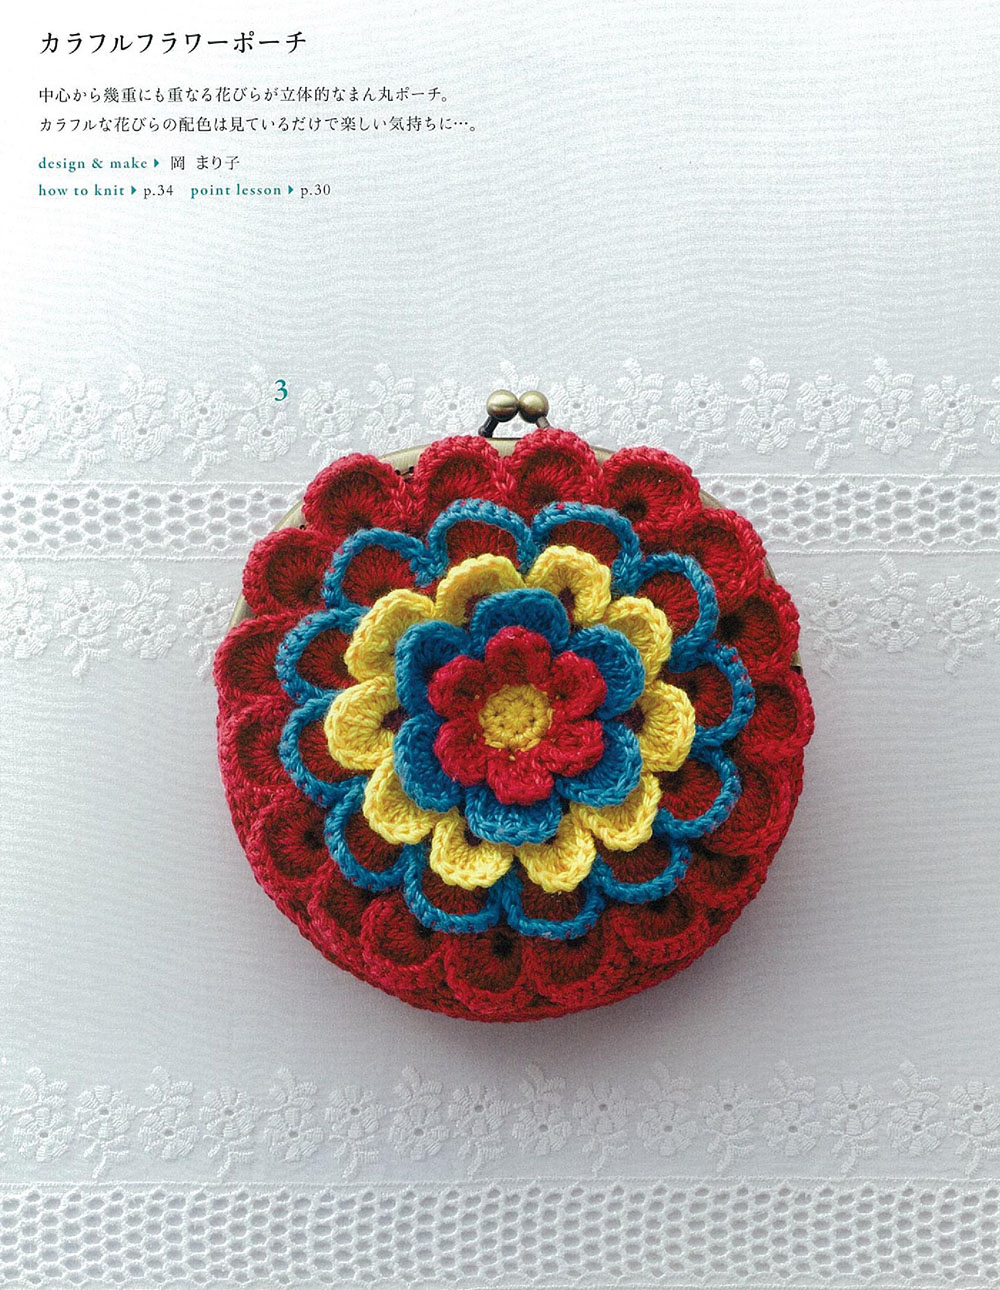 SELECT COLLECTION Crochet Pouch